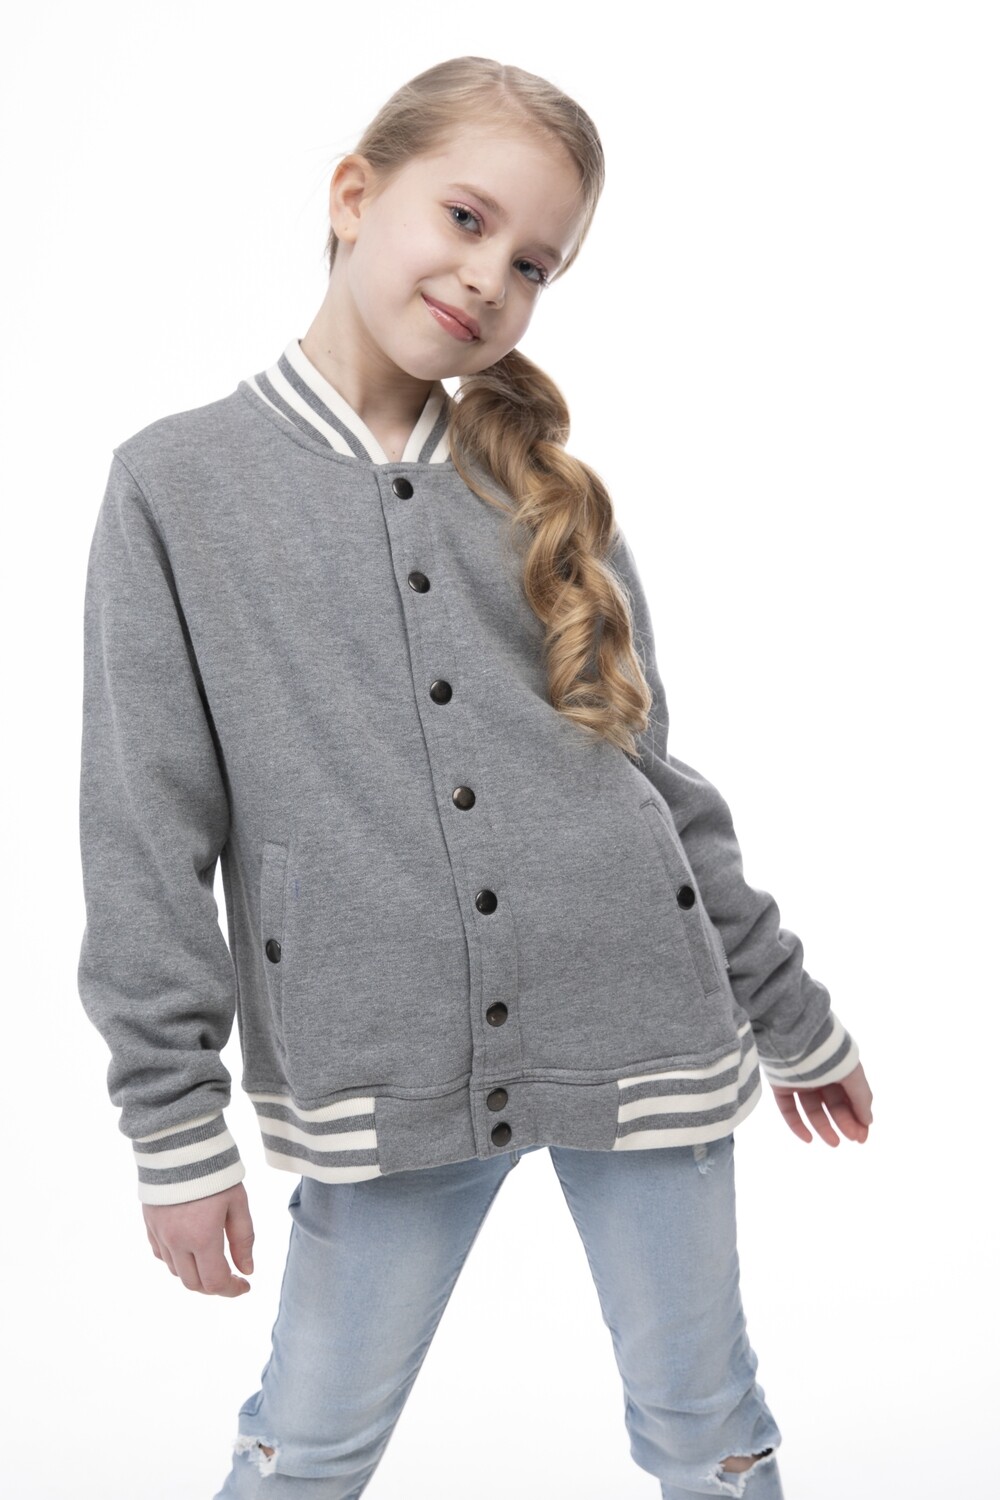 Switcher Kids College jacket with snaps Jimmy